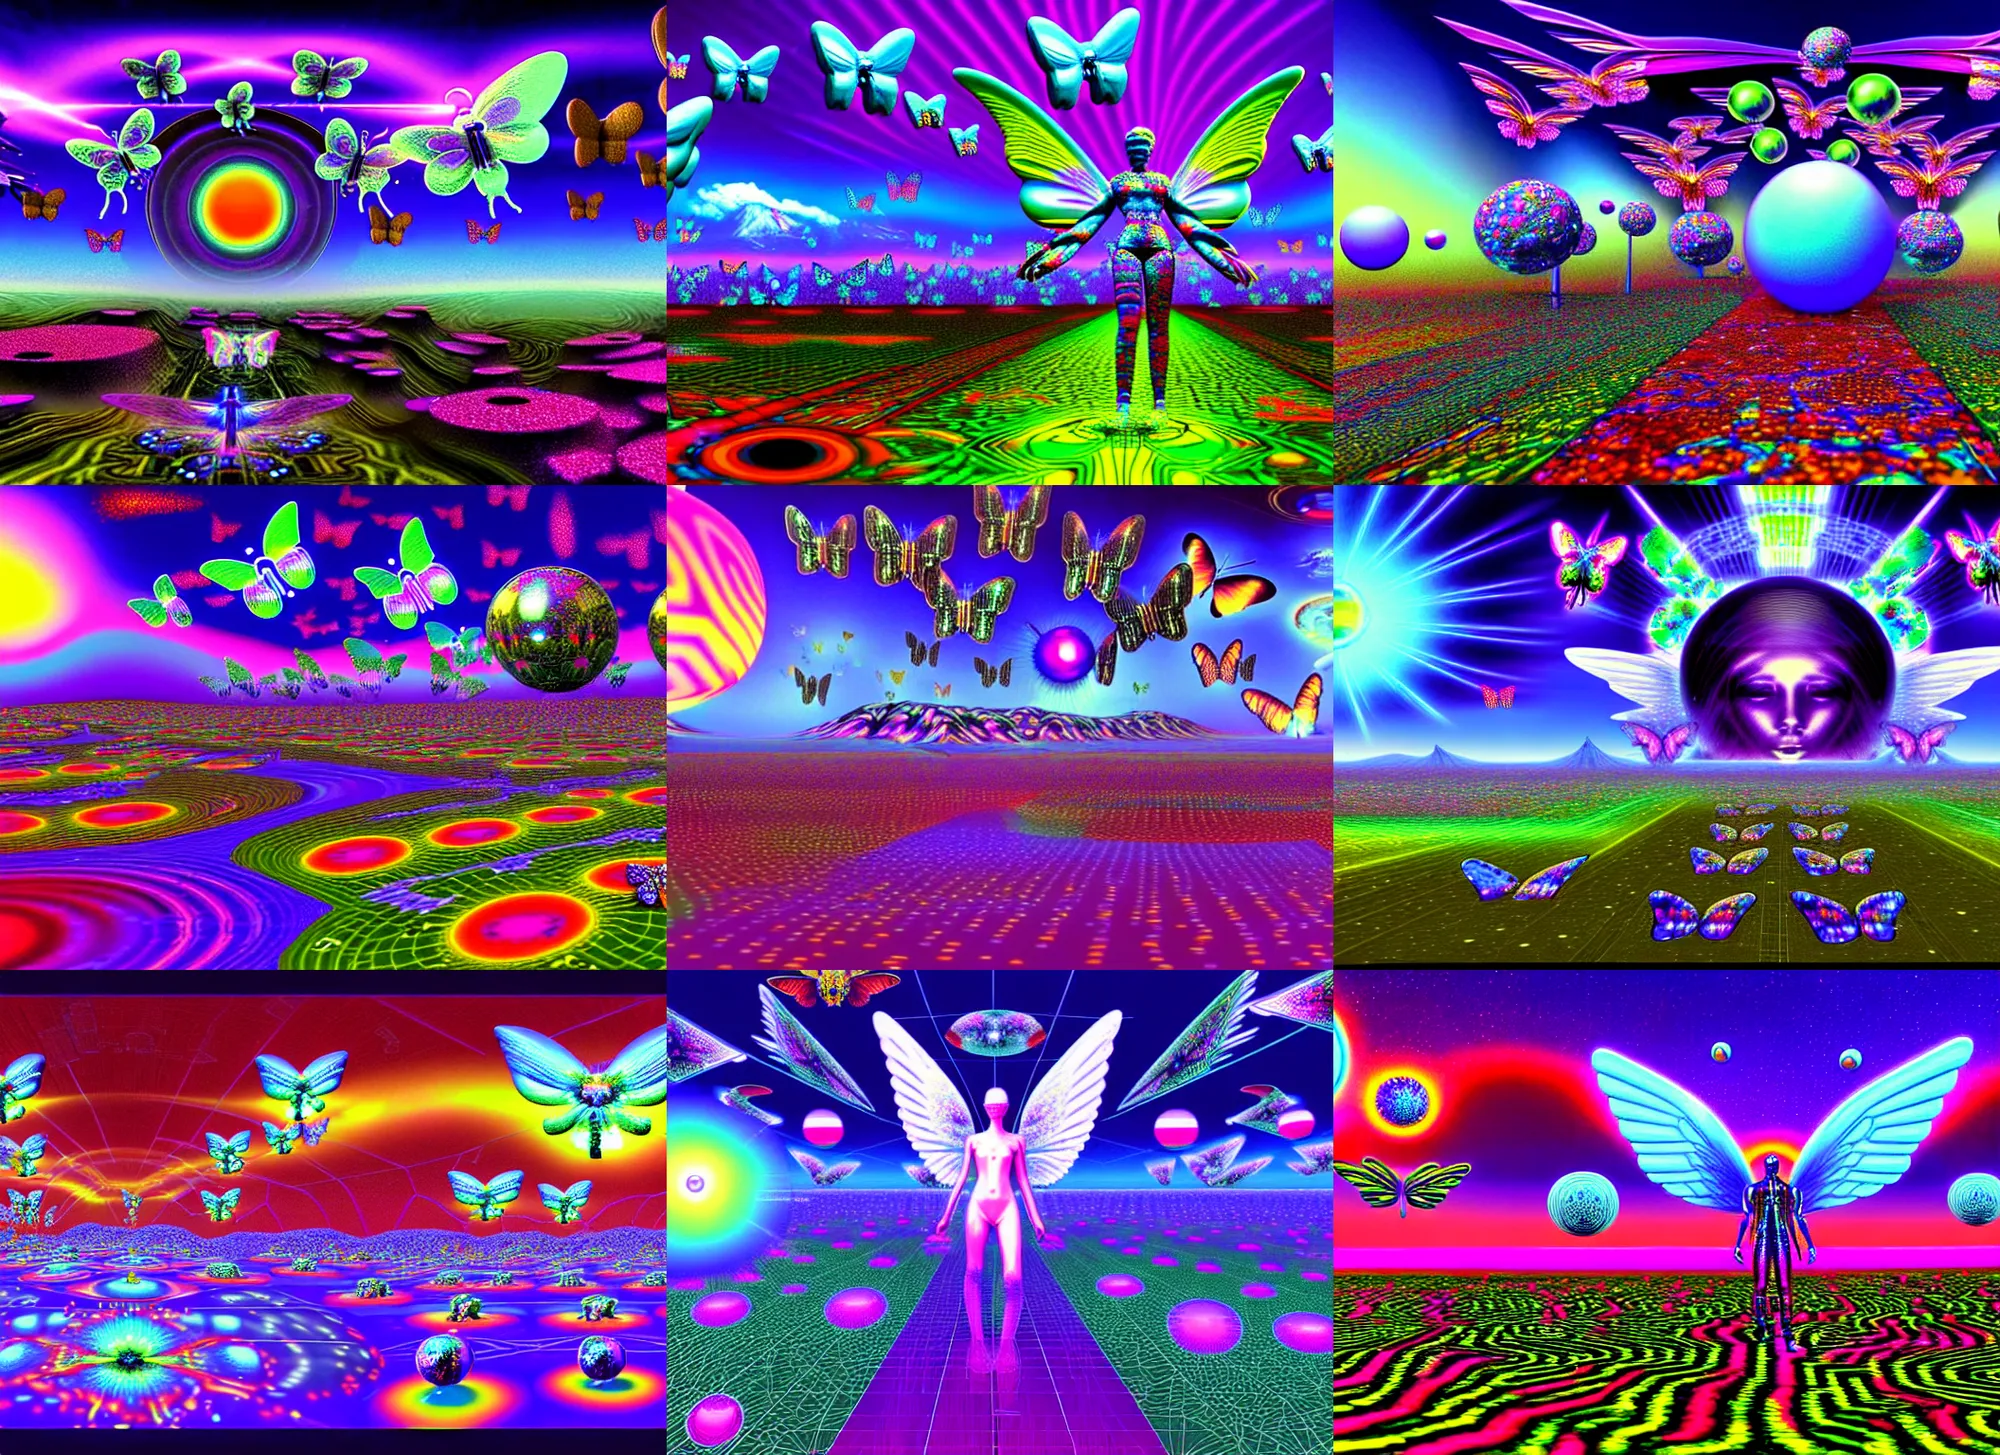 Prompt: 3 d render of cyber landscape with orbs and cyborgs with angel wings against a psychedelic surreal background with 3 d butterflies and 3 d flowers n the style of 1 9 9 0's cg graphics, lsd dream emulator psx, 3 d rendered y 2 k aesthetic by ichiro tanida, 3 do magazine, wide shot